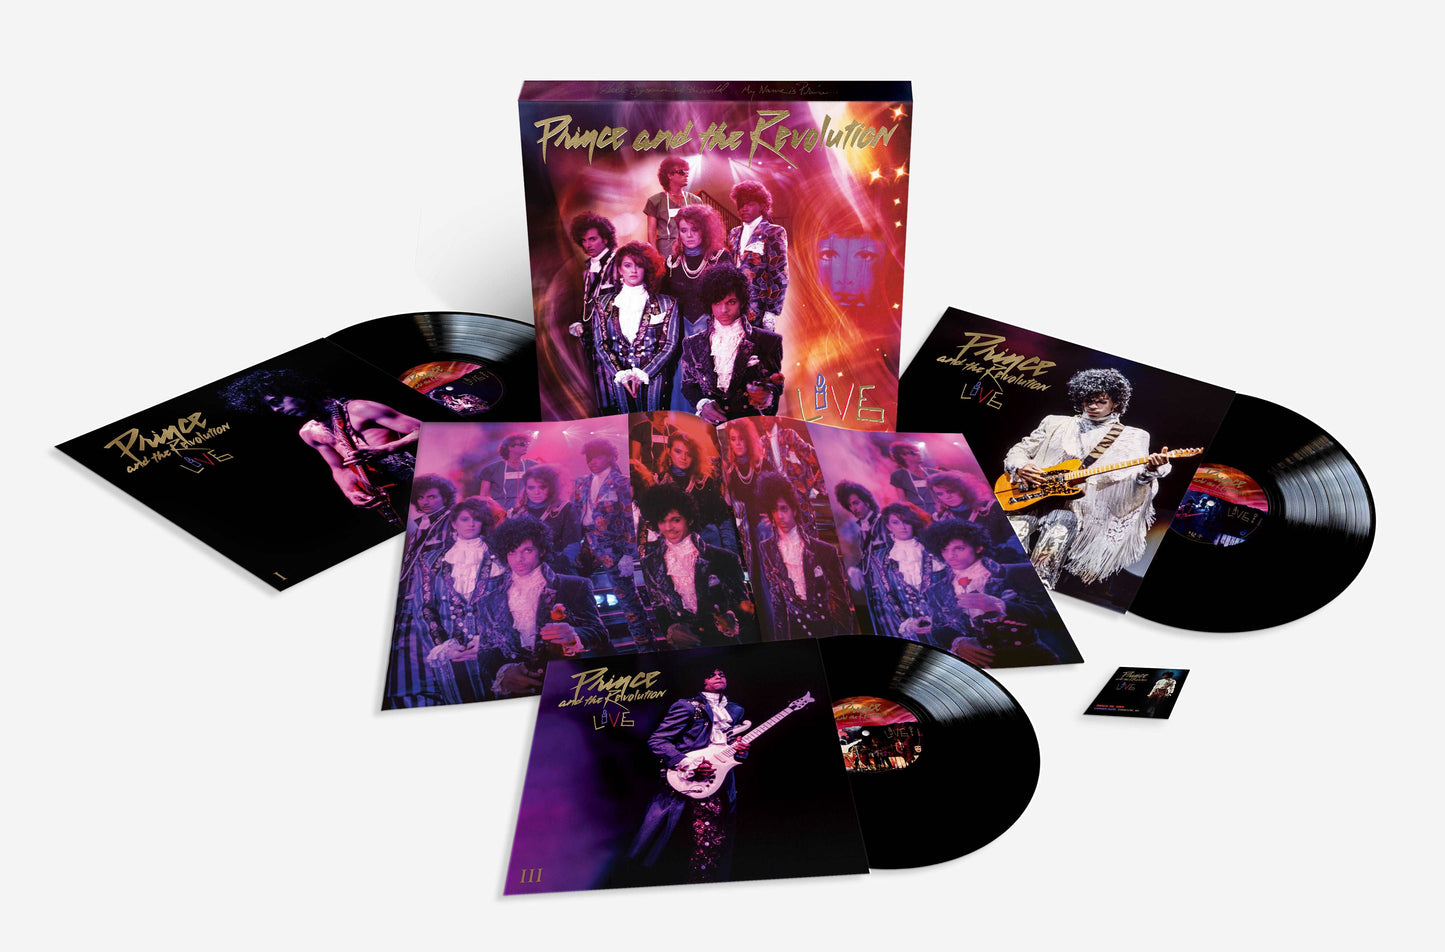 Prince - Prince and The Revolution - The Vault Collective ltd